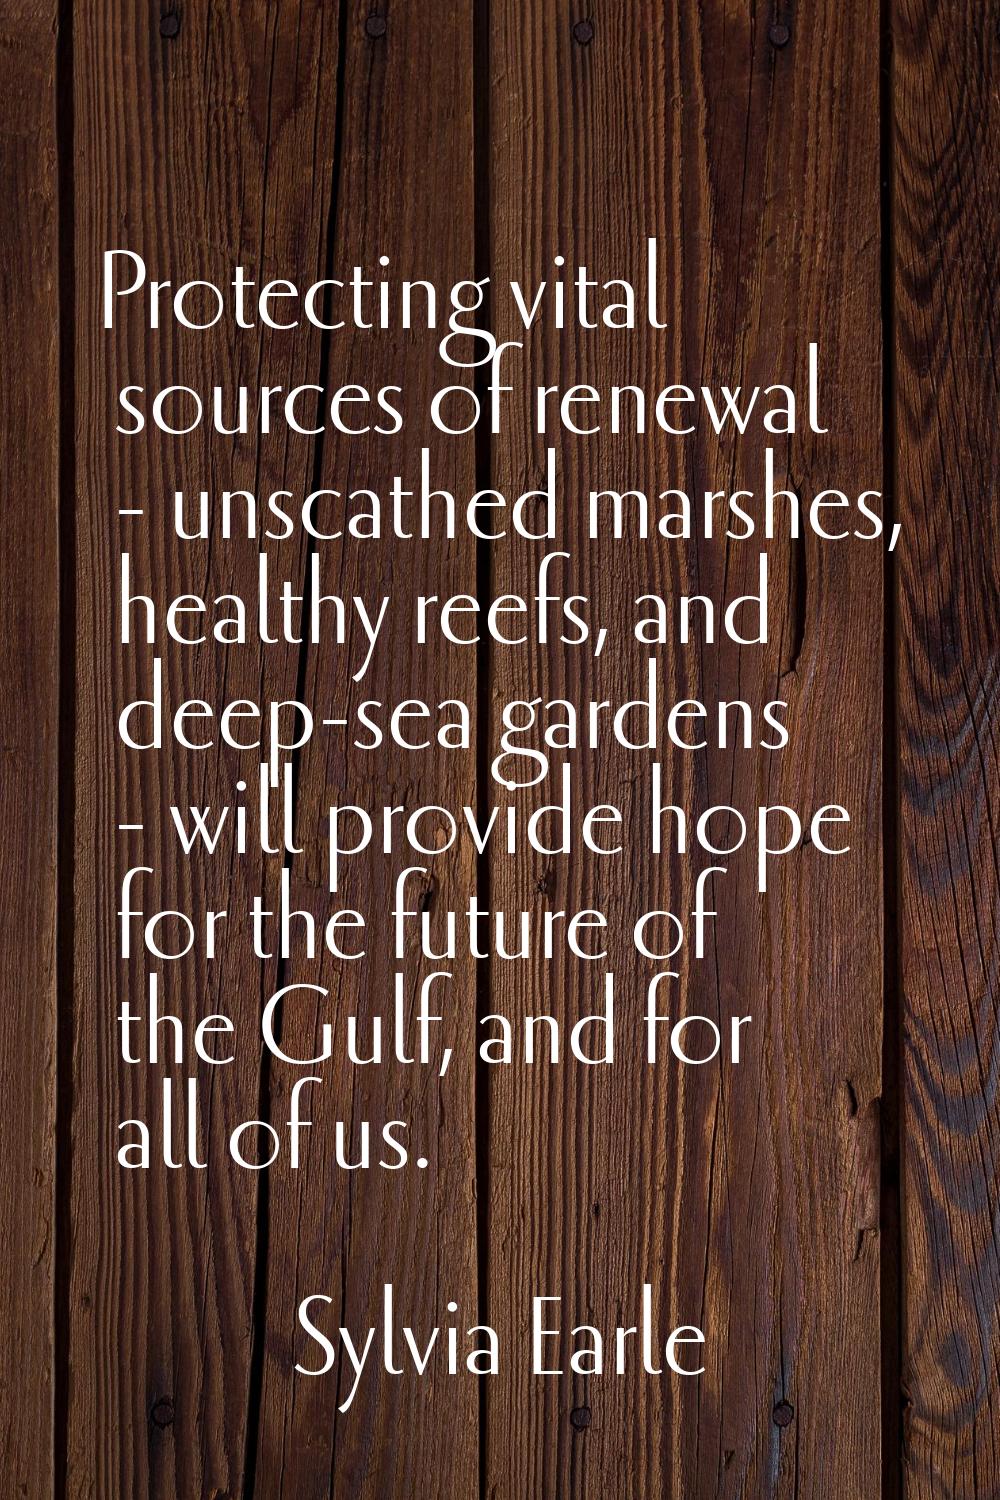 Protecting vital sources of renewal - unscathed marshes, healthy reefs, and deep-sea gardens - will